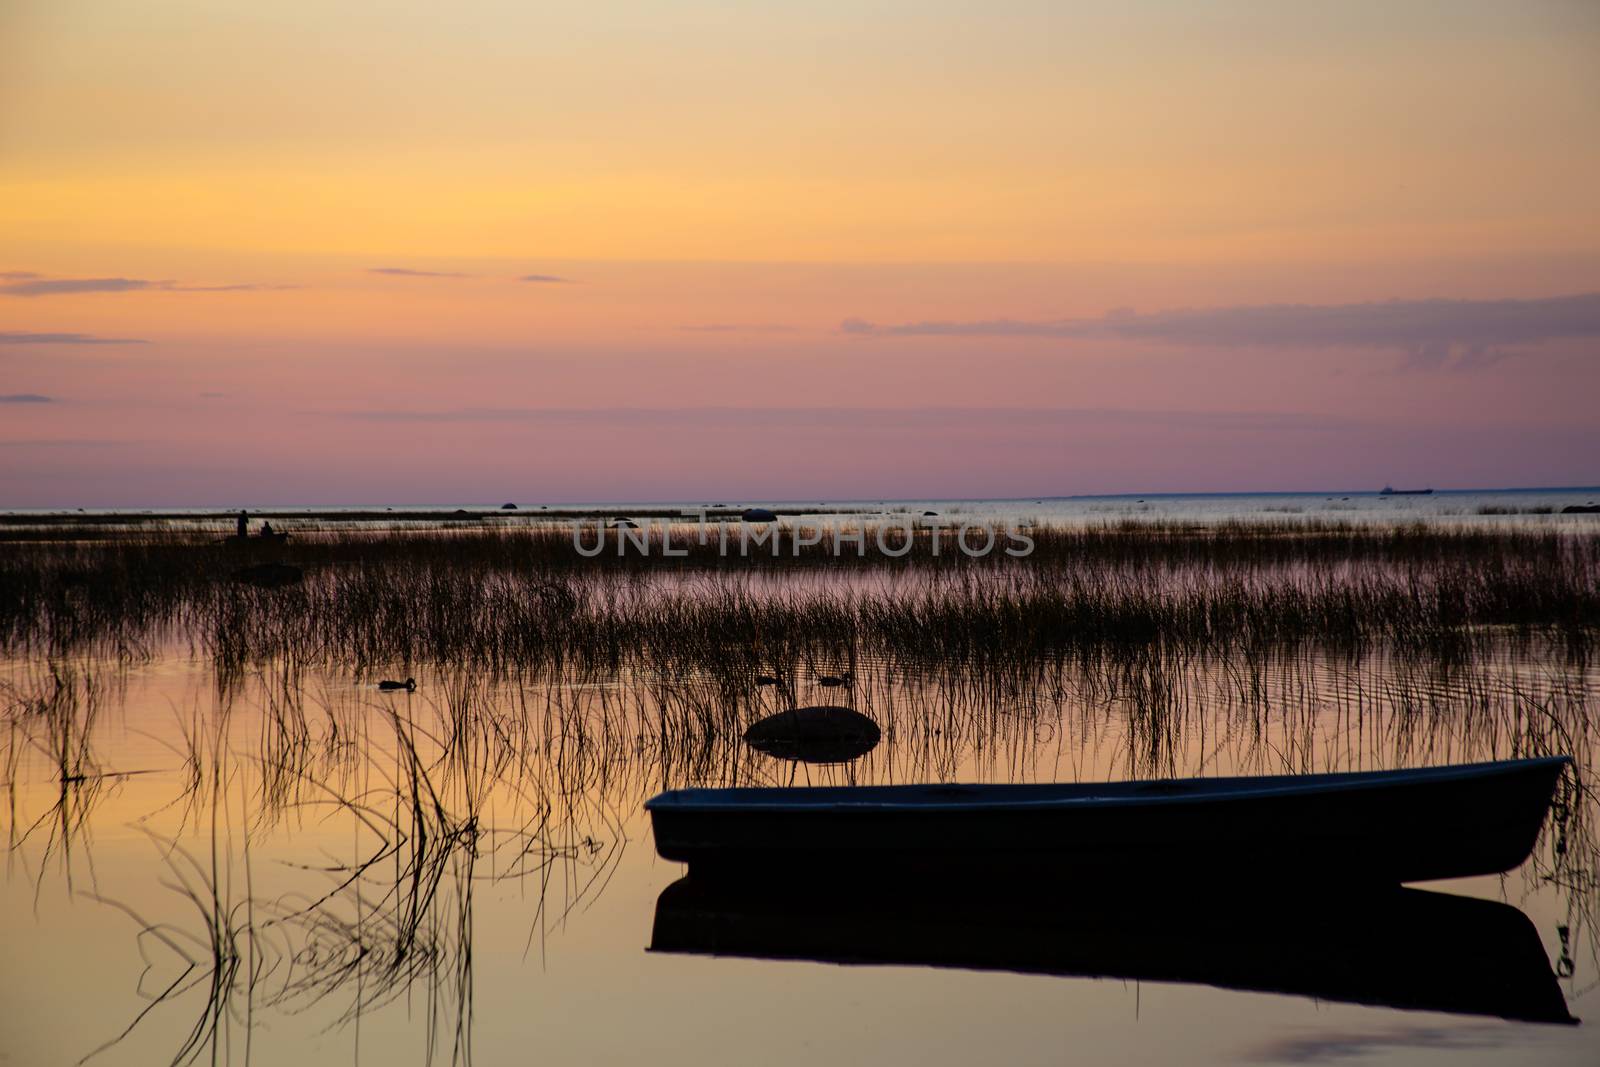 Silhouette of a fishing boat at anchor, reflected in the calm and clear water of the lake, covered with sedge at dusk against the background of a beautiful multi-colored sunset sky.